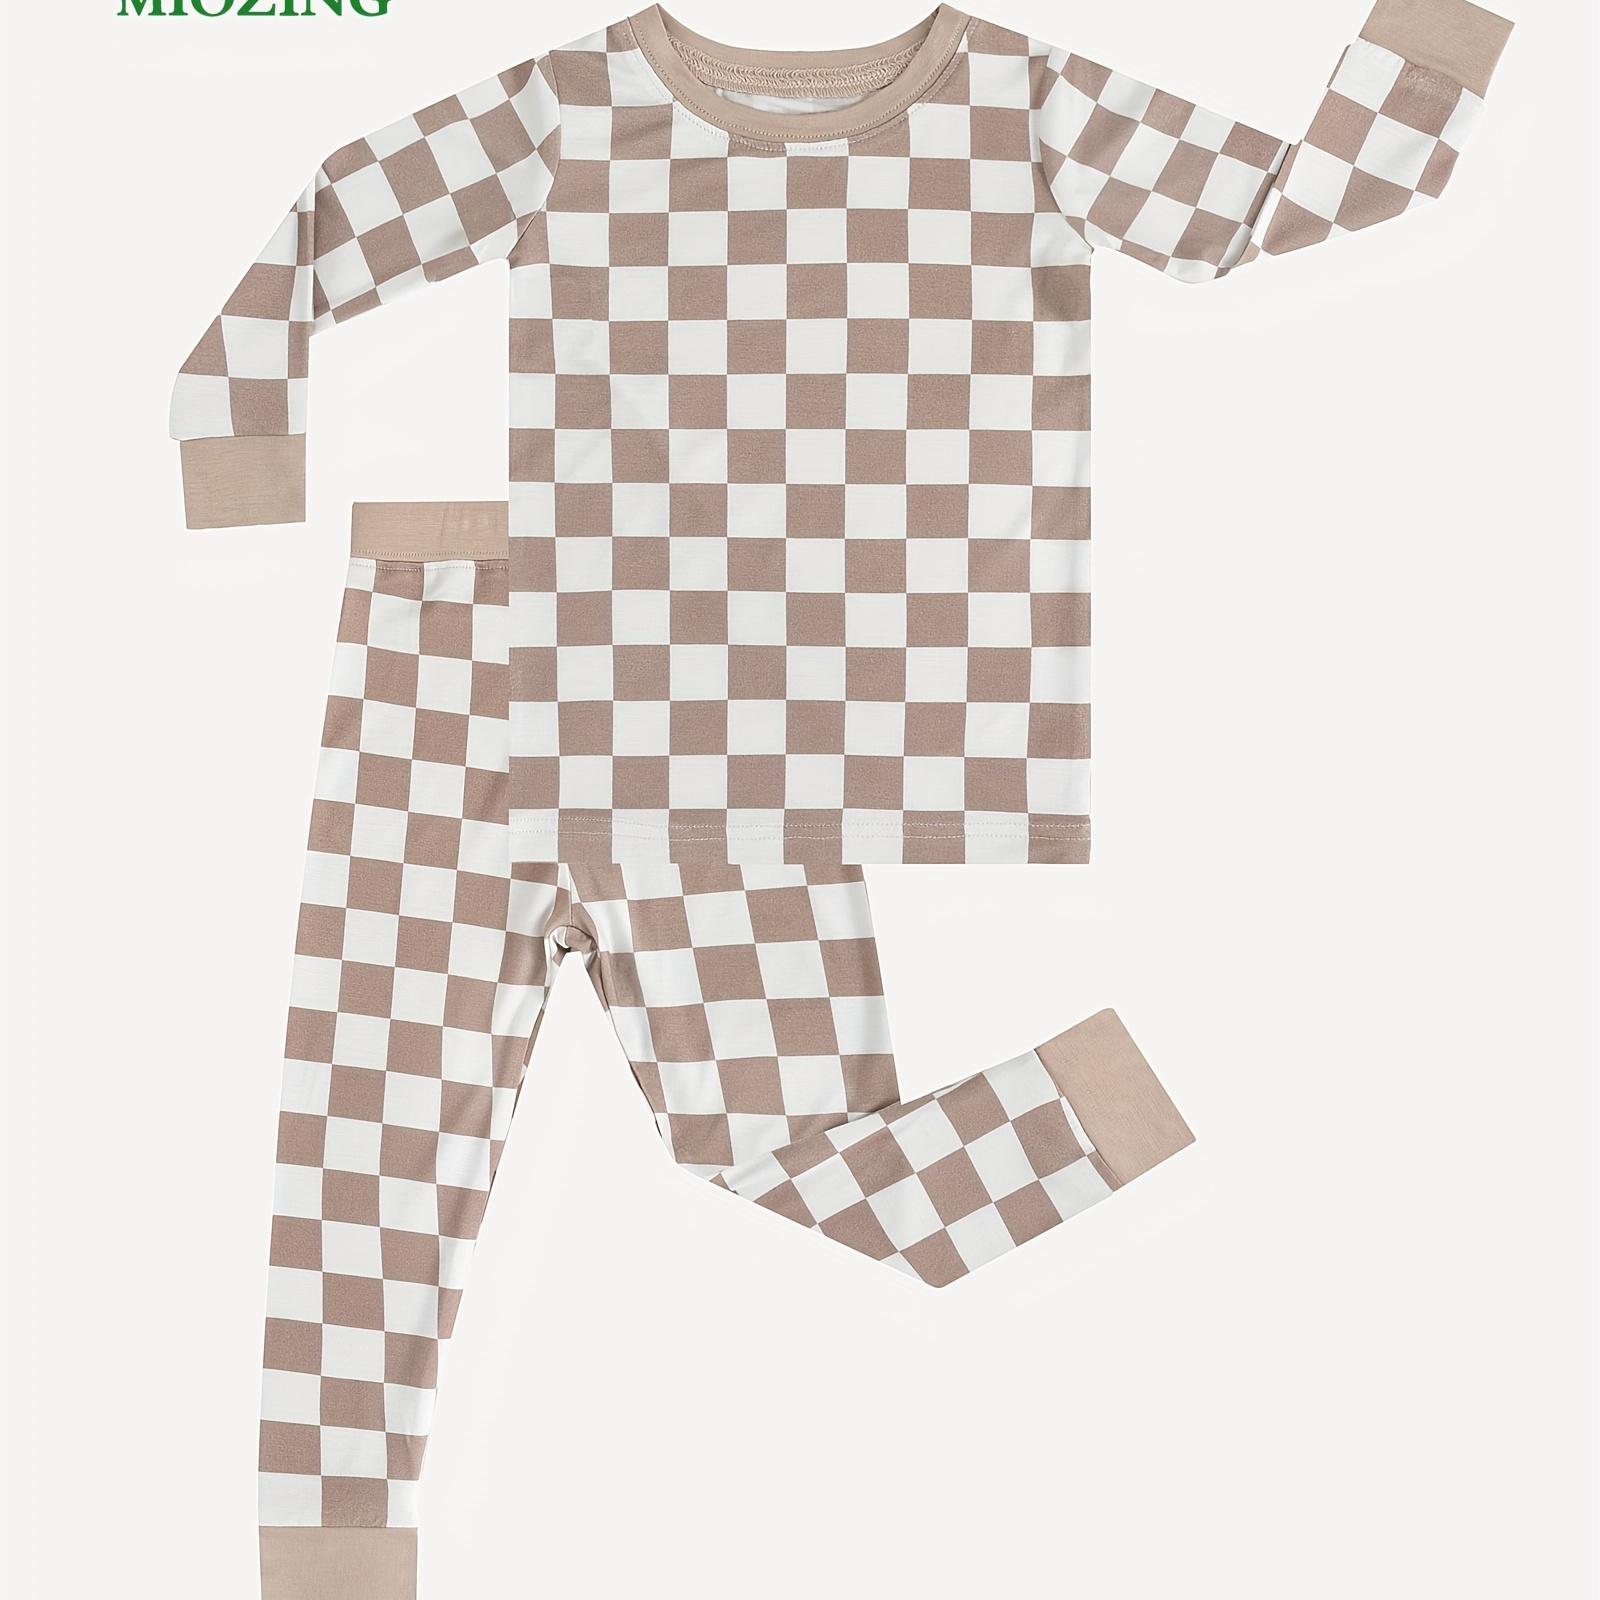 

Bamboo Fiber Fabric 2pcs Toddler Boy's Checkerboard Pattern Outfit, Long Sleeve Top & Pants Set, Baby's Clothing, As Gift.